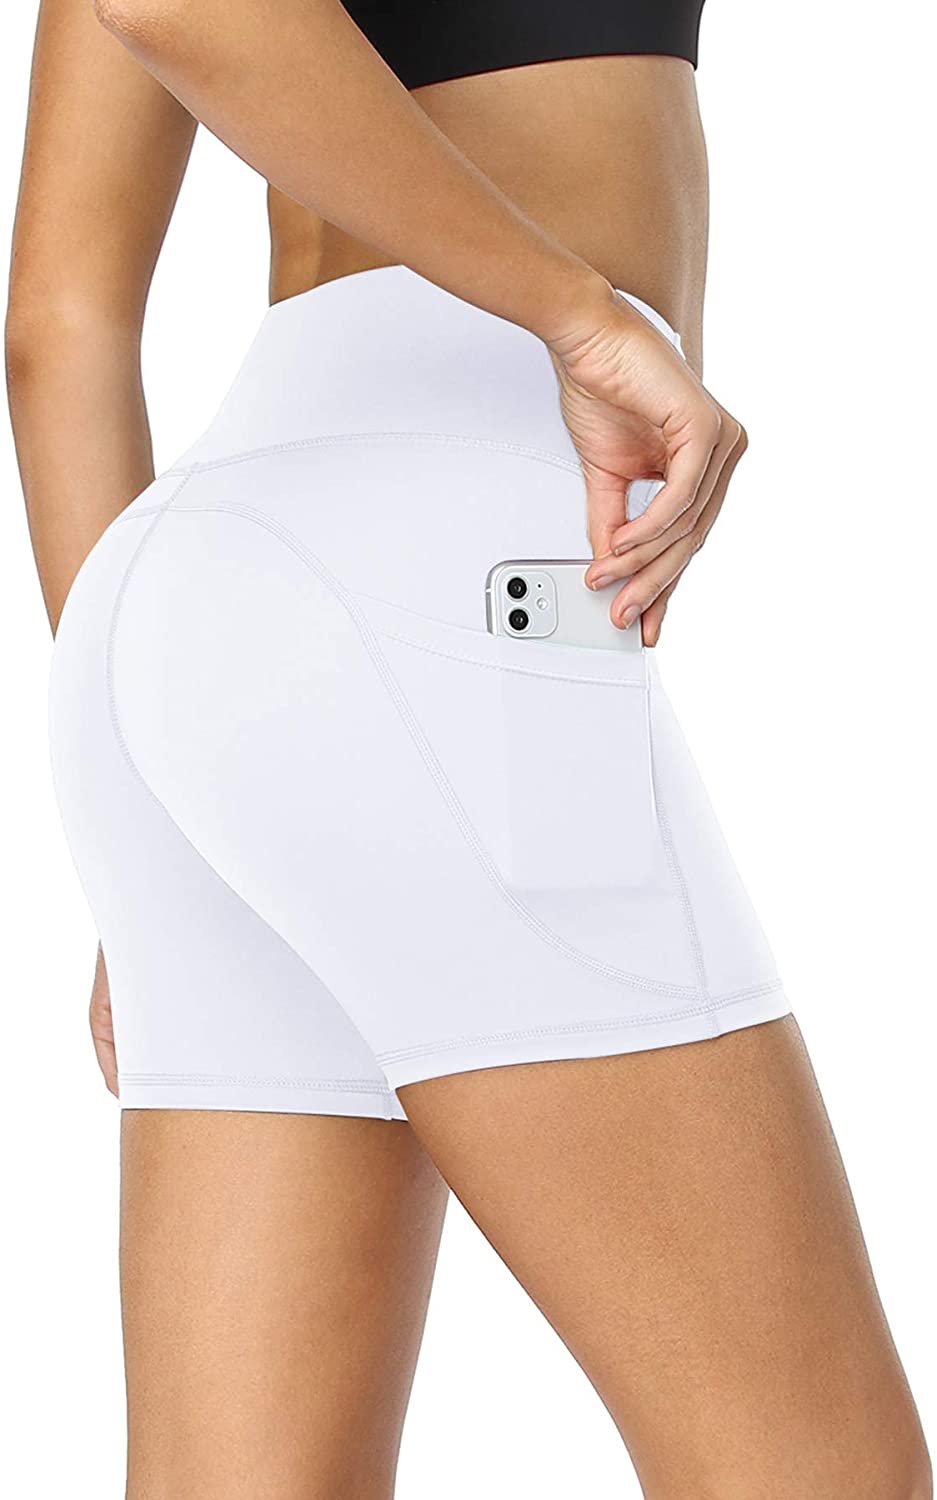 Women's Naked Feeling Biker Shorts Workout Athletic Yoga Shorts Tights Running Shorts with 2 Side Pockets - 5 Inches